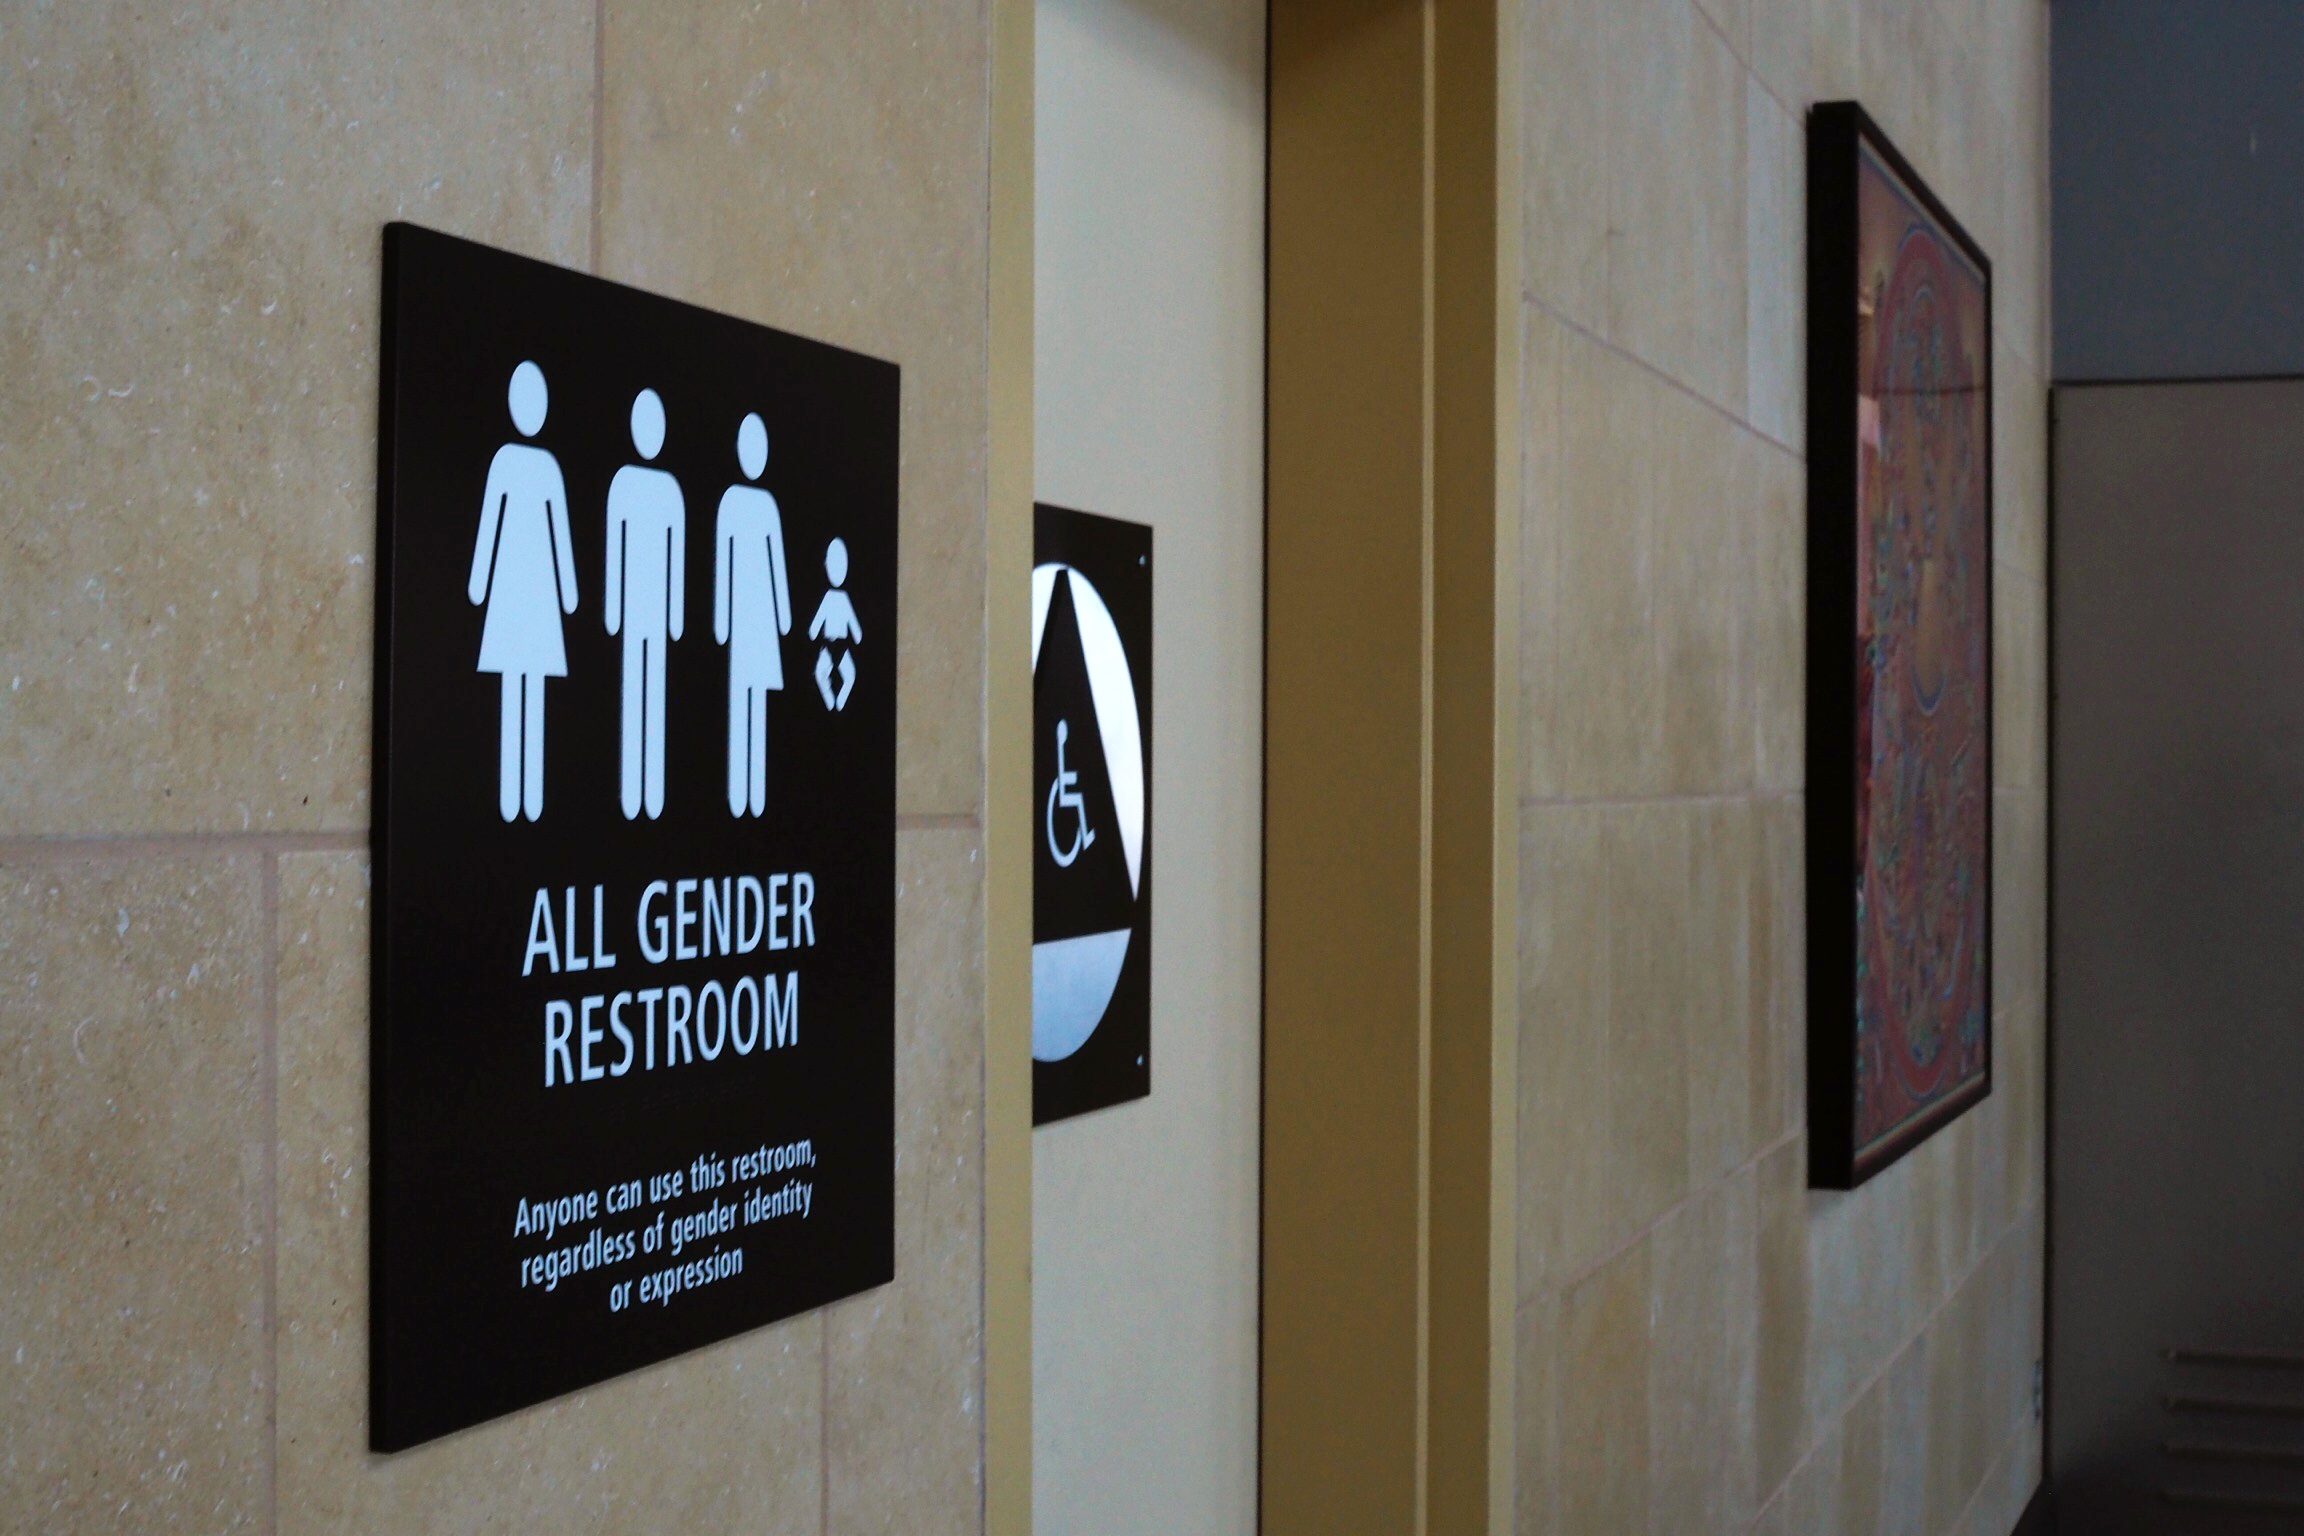 US states sue federal government over transgender bathroom use